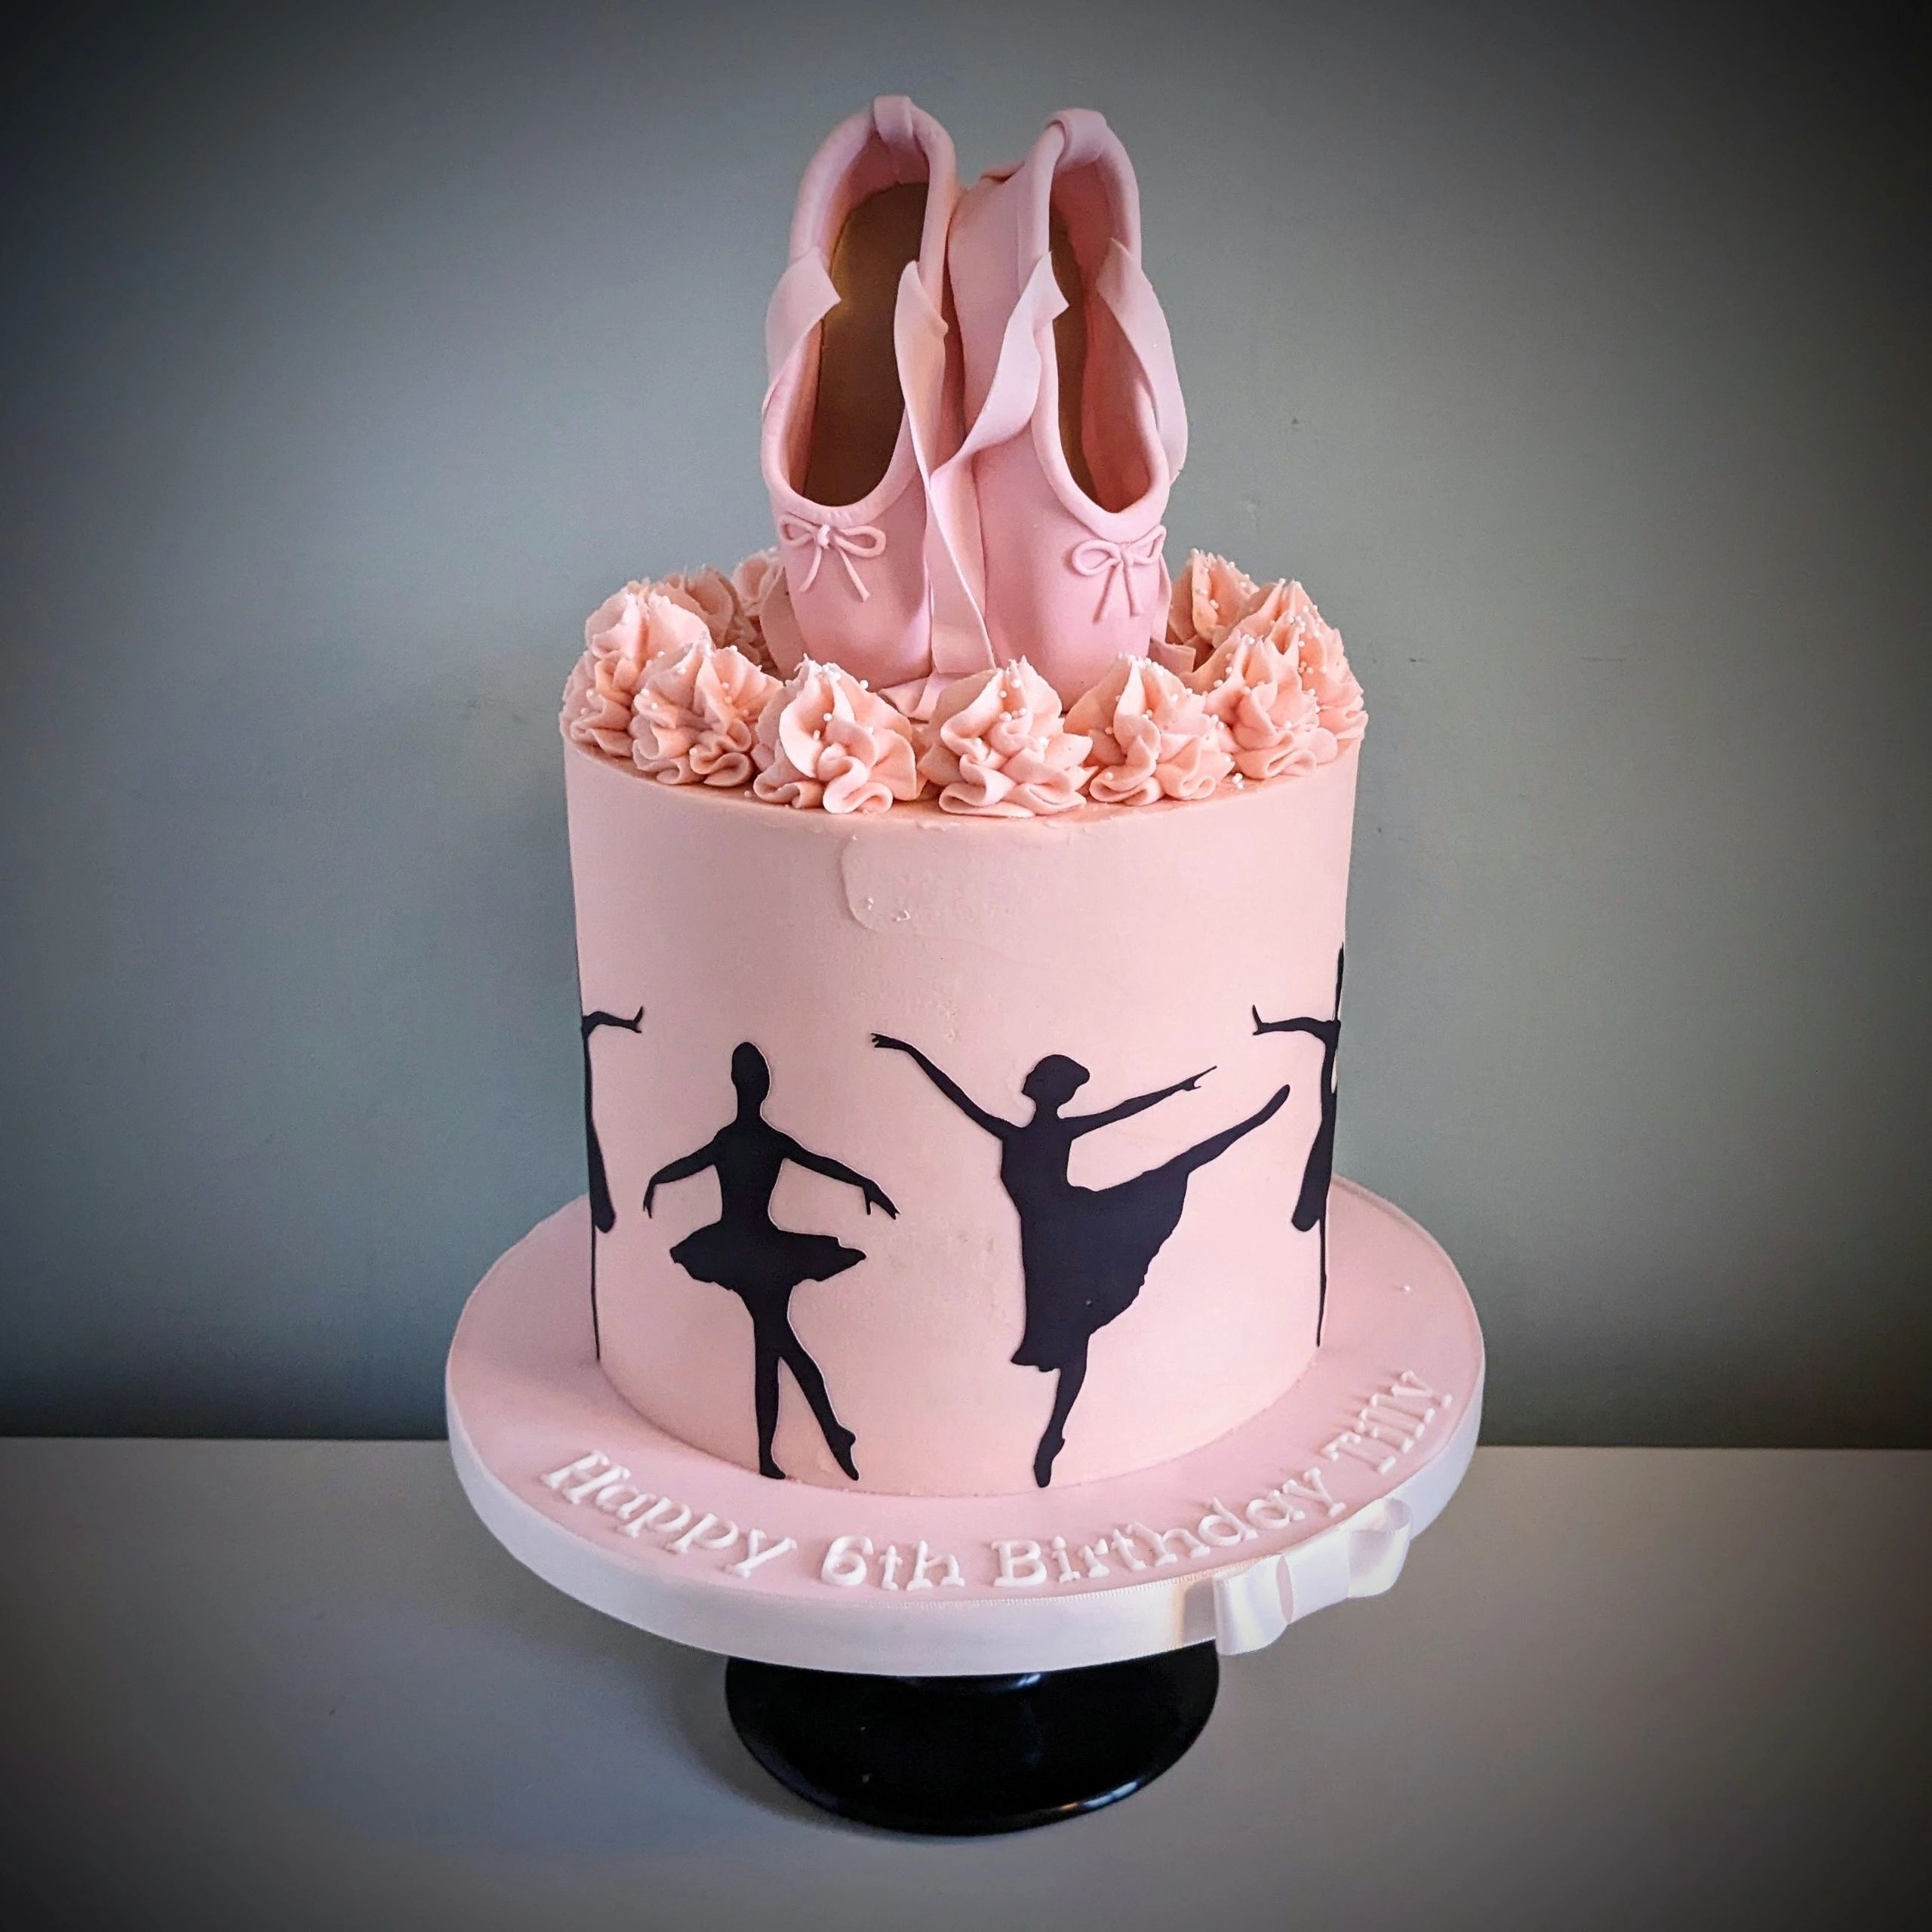 Order Online Ballerina Birthday Cake From The French Cake Company |  Doorstep Delivery | Order Now For Quick Delivery